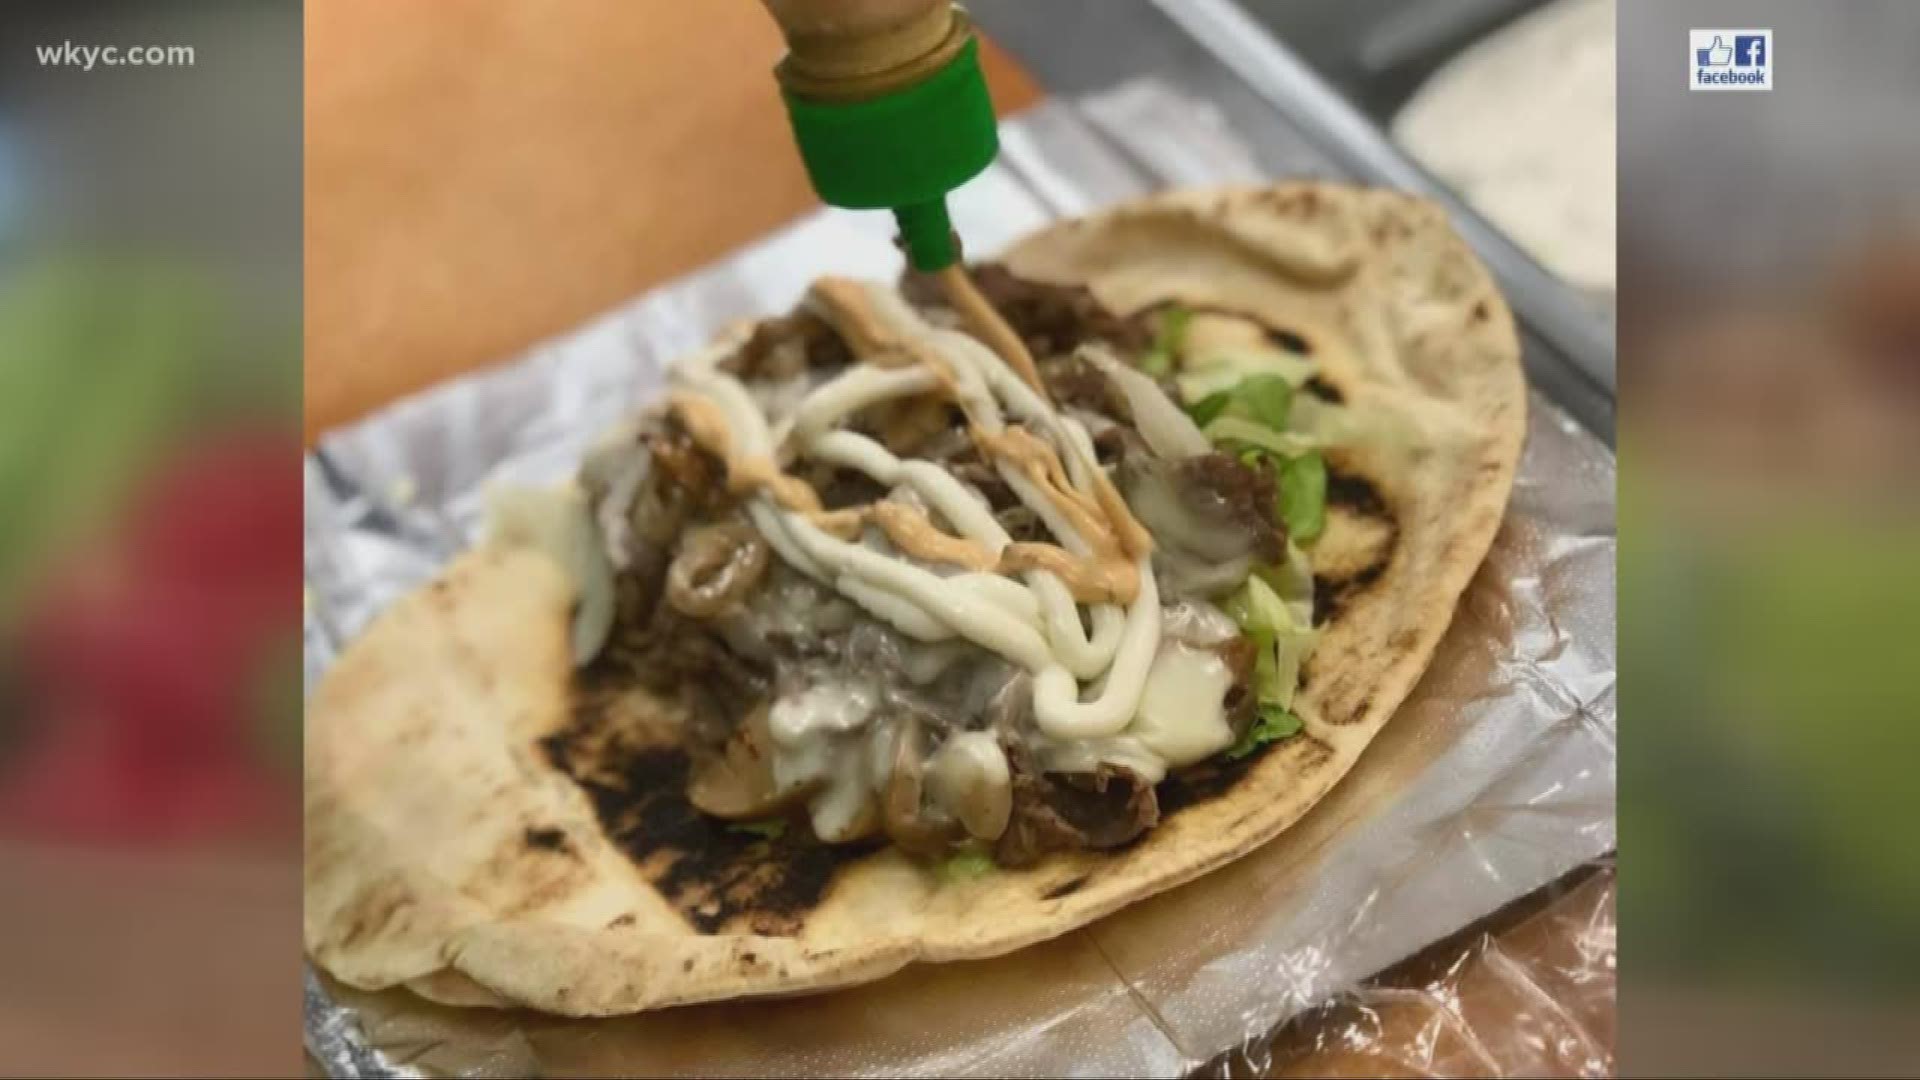 Maha's Falafil announced on its Facebook page that it is closing after more than 30 years at the market. It will close officially on December 31.